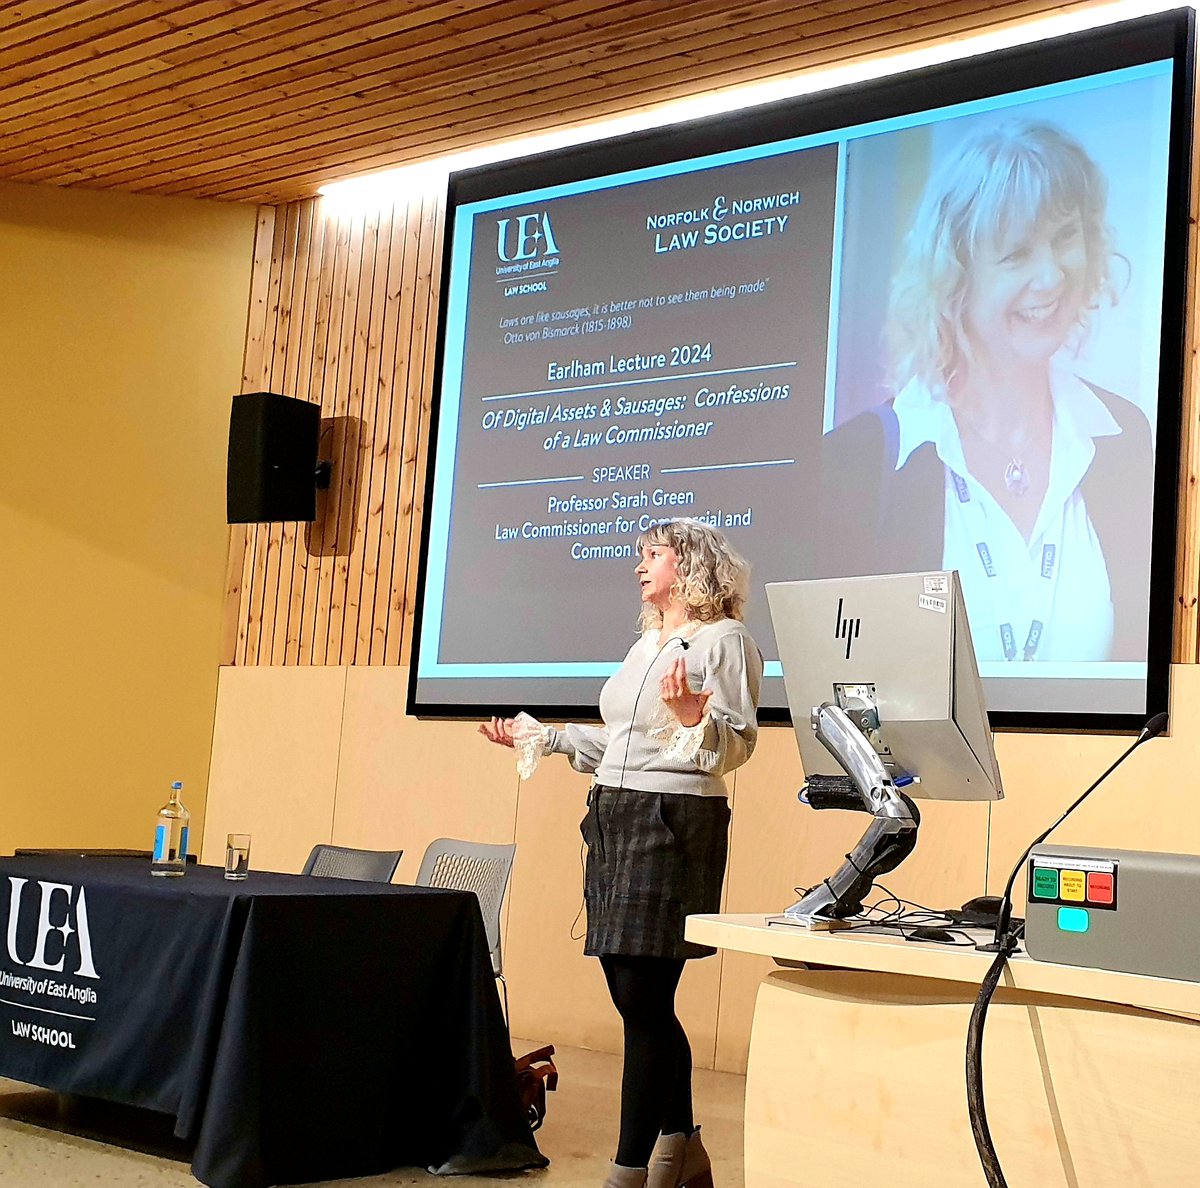 On Tuesday evening @SarahCatGreen gave @uealaw and Norfolk & Norwich Law Society a tour de force talk, on how @Law_Commission has worked with policymakers to develop the law around digital assets as a 3rd category of property in the context of global trade. A fantastic evening!